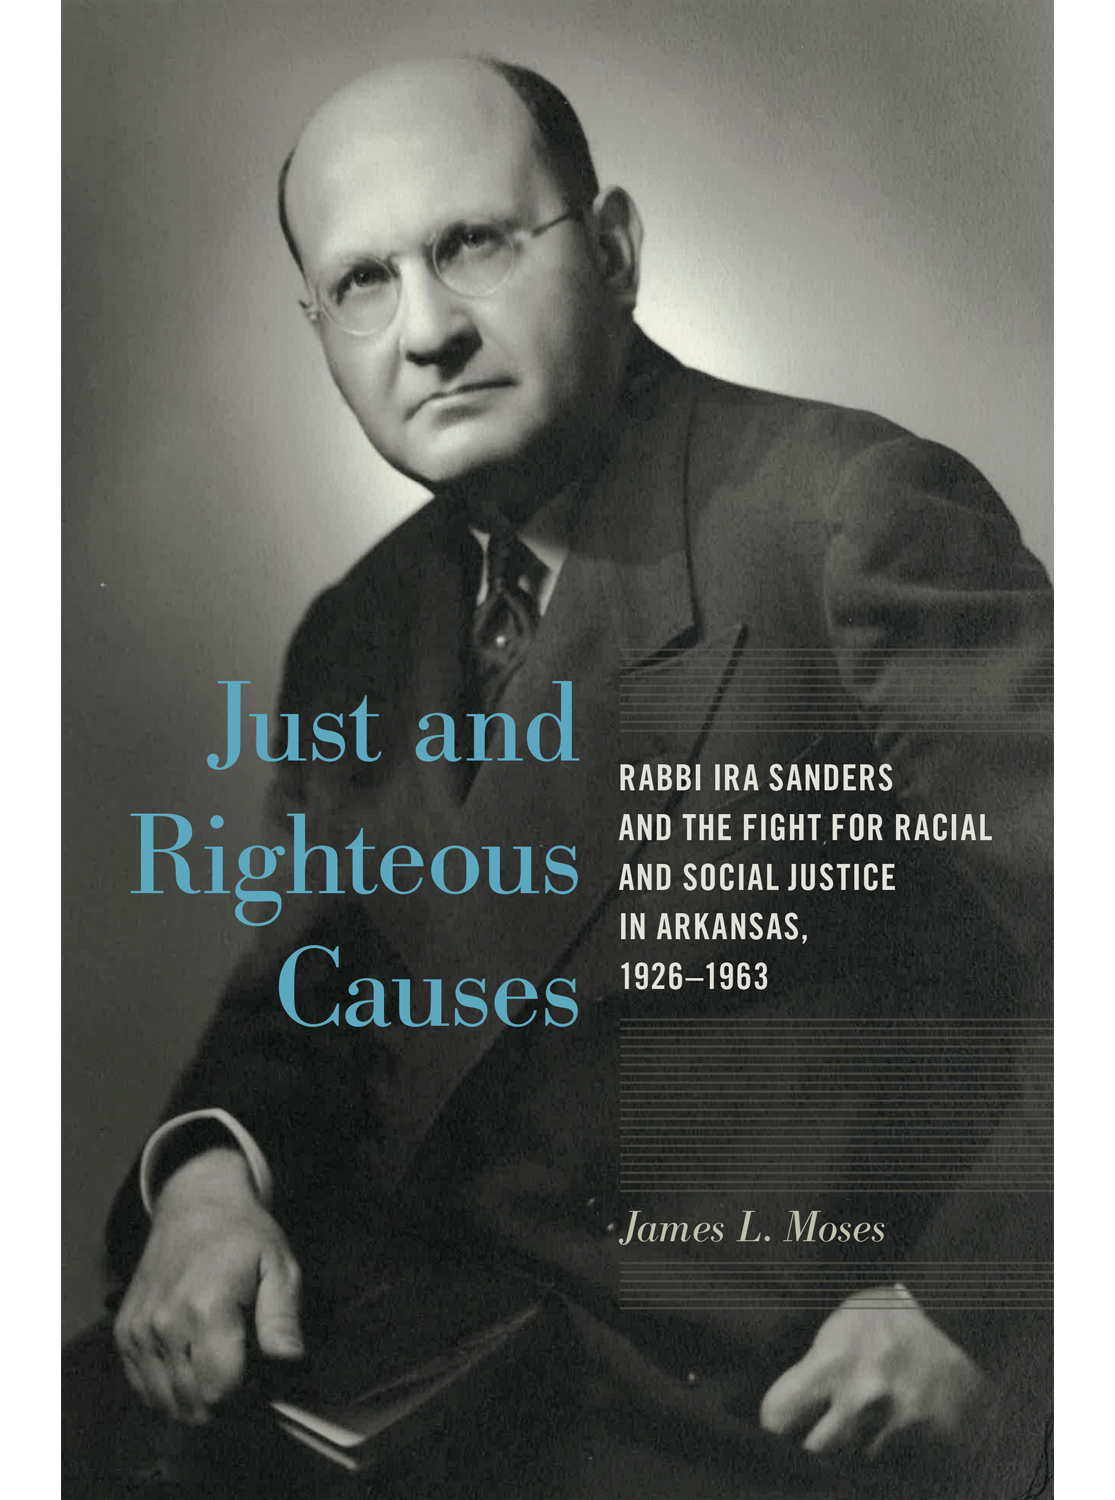 Just and Righteous Causes | University of Arkansas Press